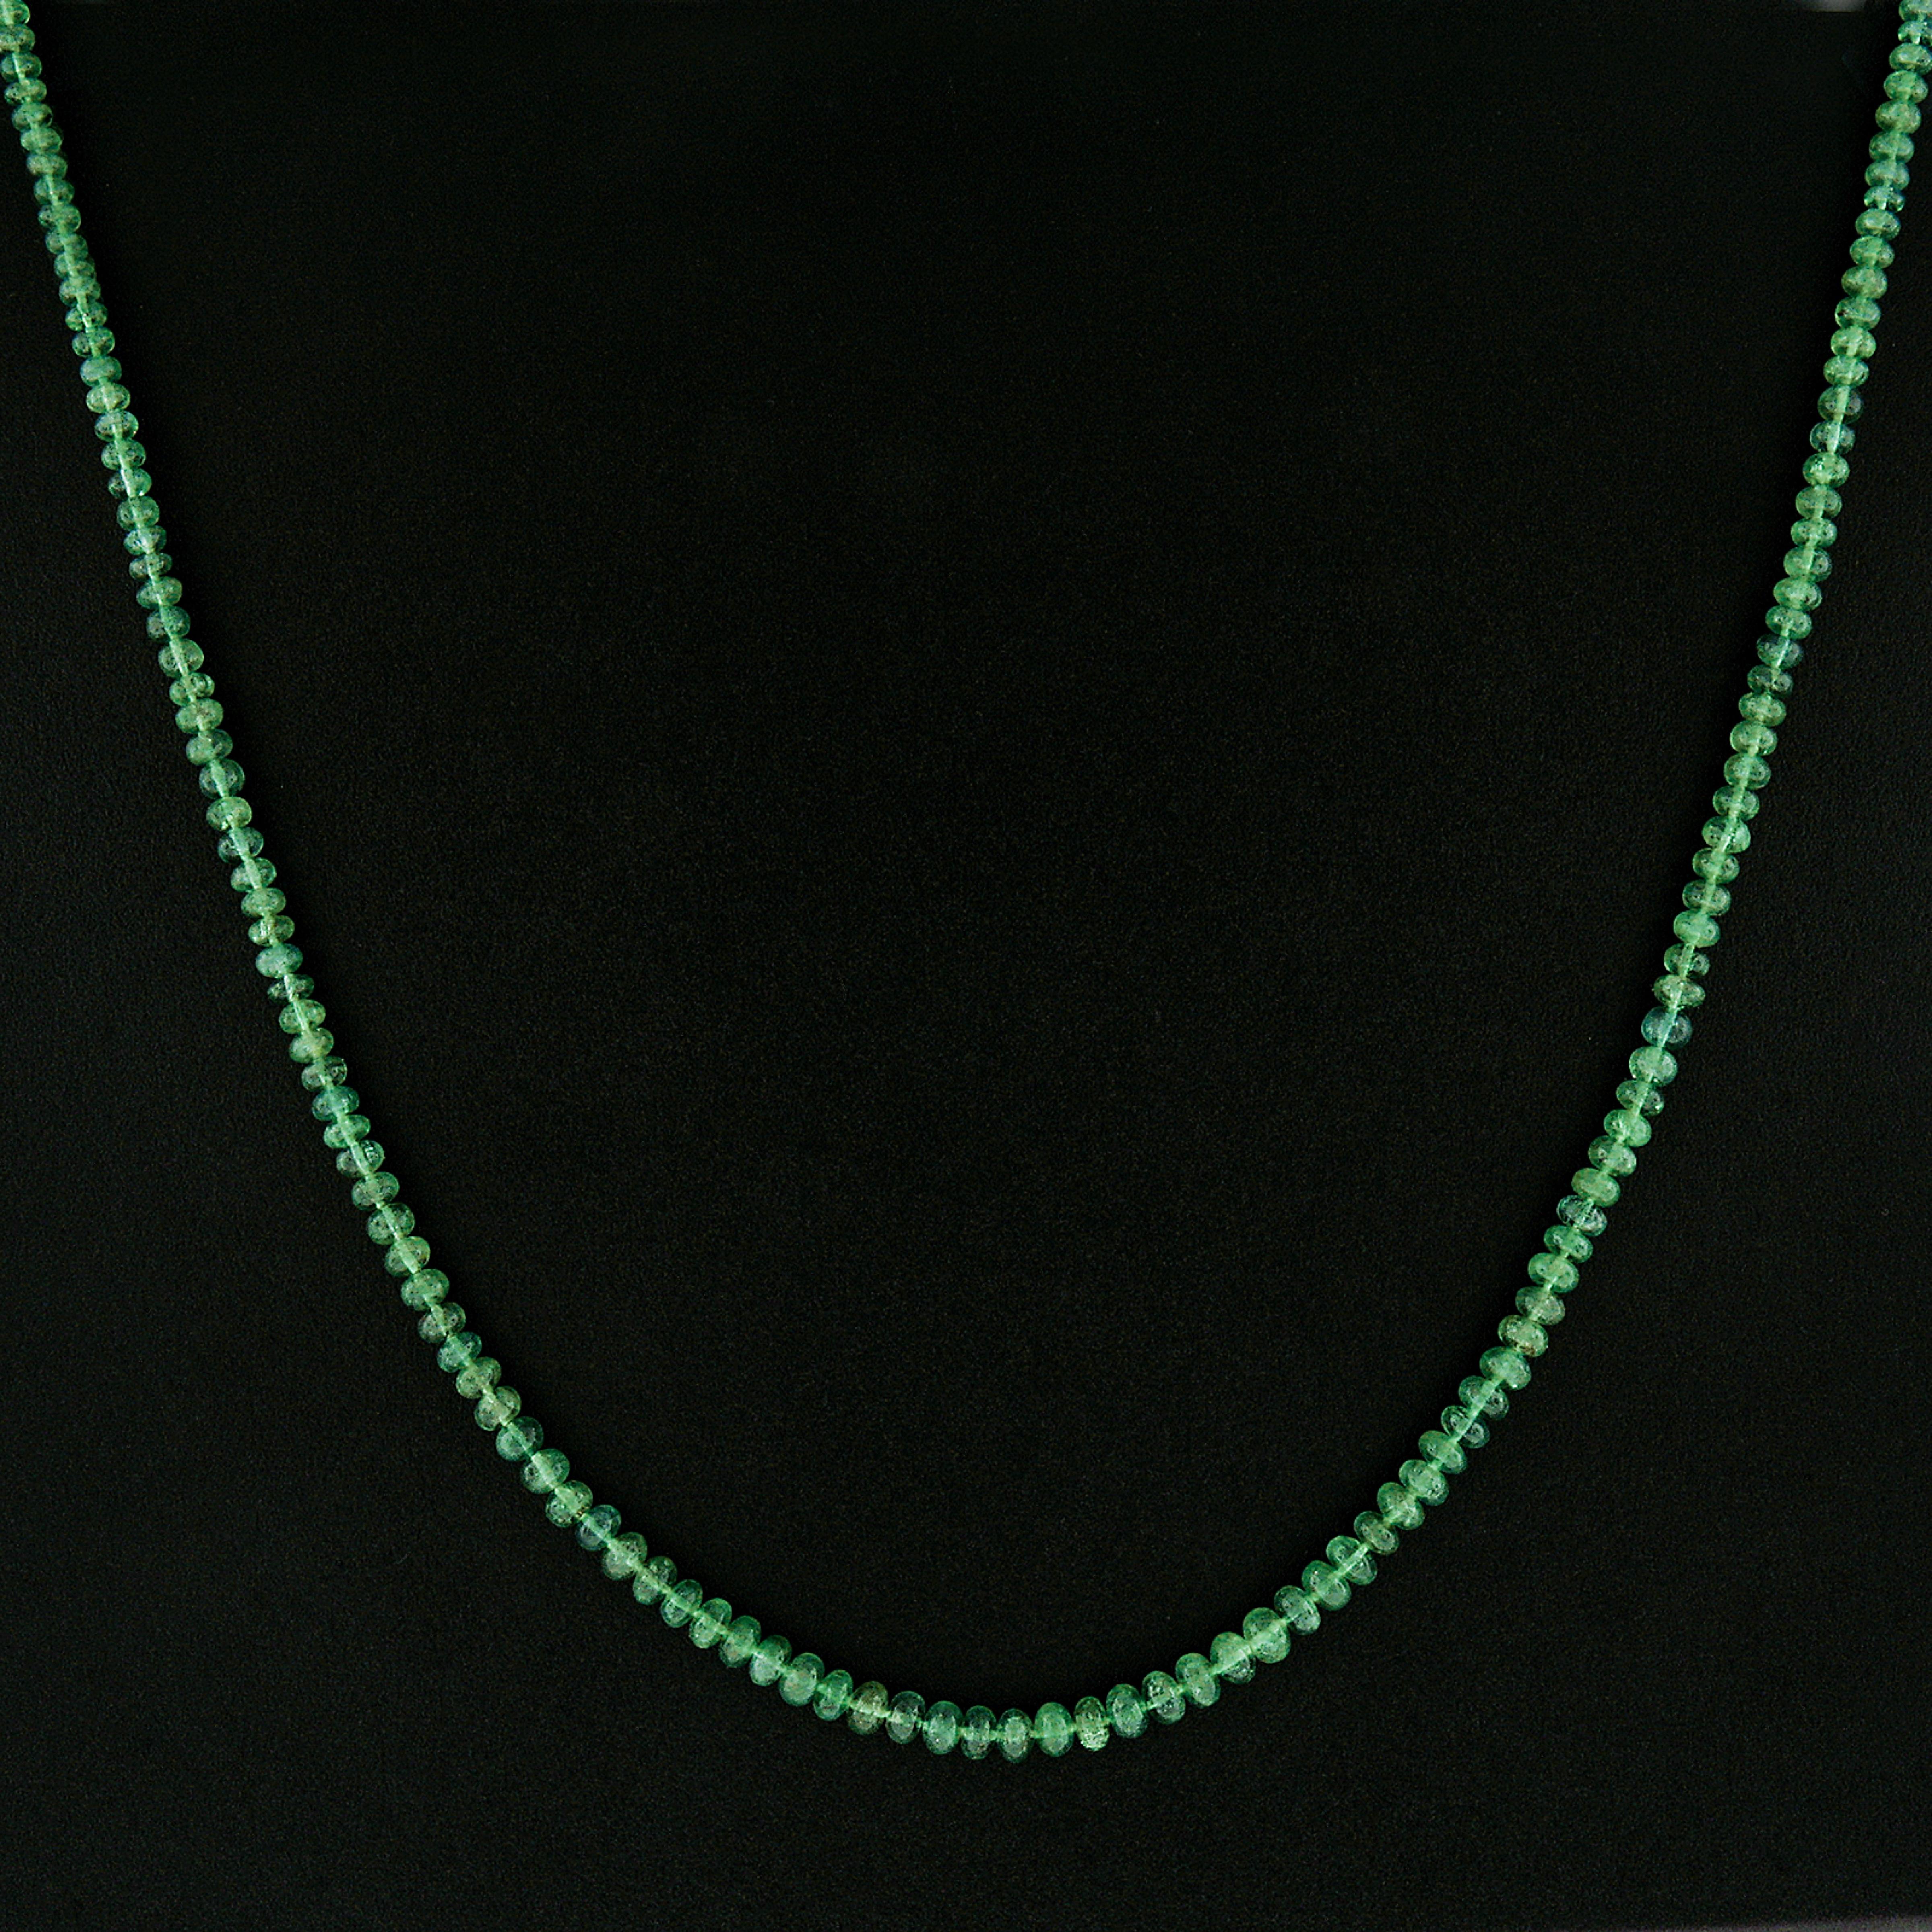 Vintage Rondelle Bead GIA Rich Green Emerald Strand Necklace 14k Gold Clasp For Sale 2